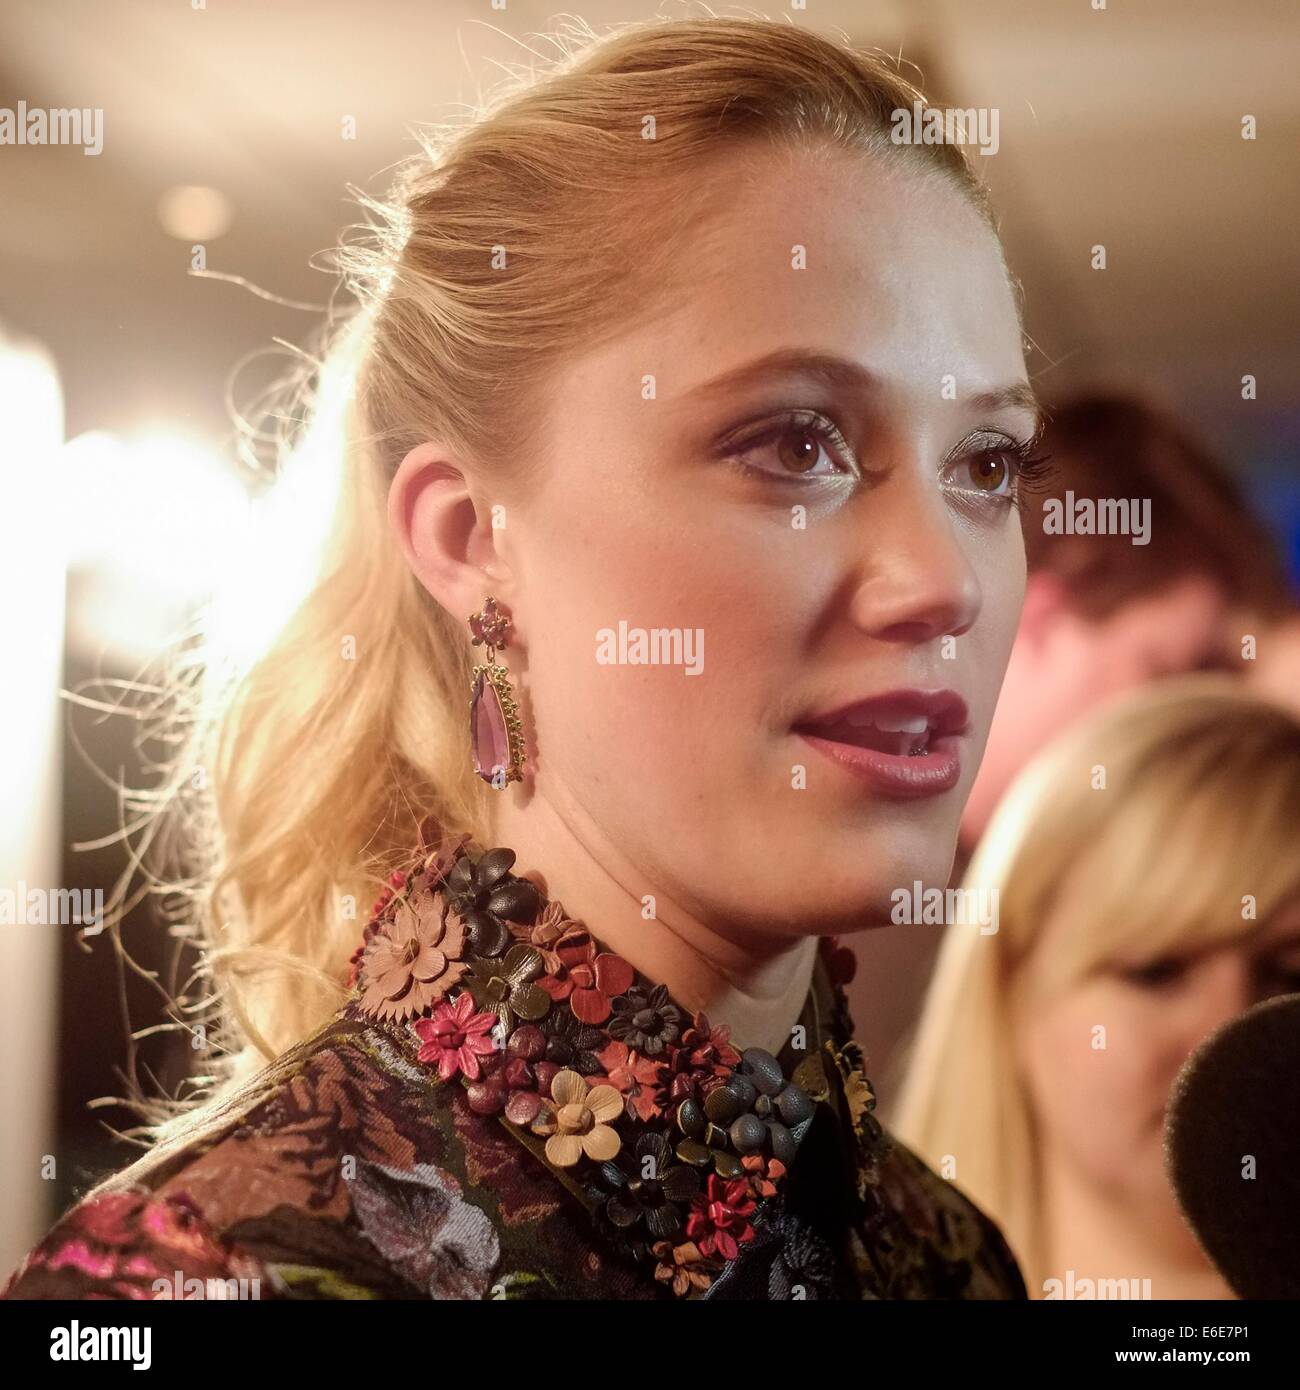 The 15th Film4 Frightfest on 21/08/2014 at The VUE West End, London. Media Wall and Photocall for the opening film The Guest. Attended by the Director (Adam), Writer (Simon) and Actress (Maika). Persons pictured: Maika Monroe. Picture by Julie Edwards Stock Photo